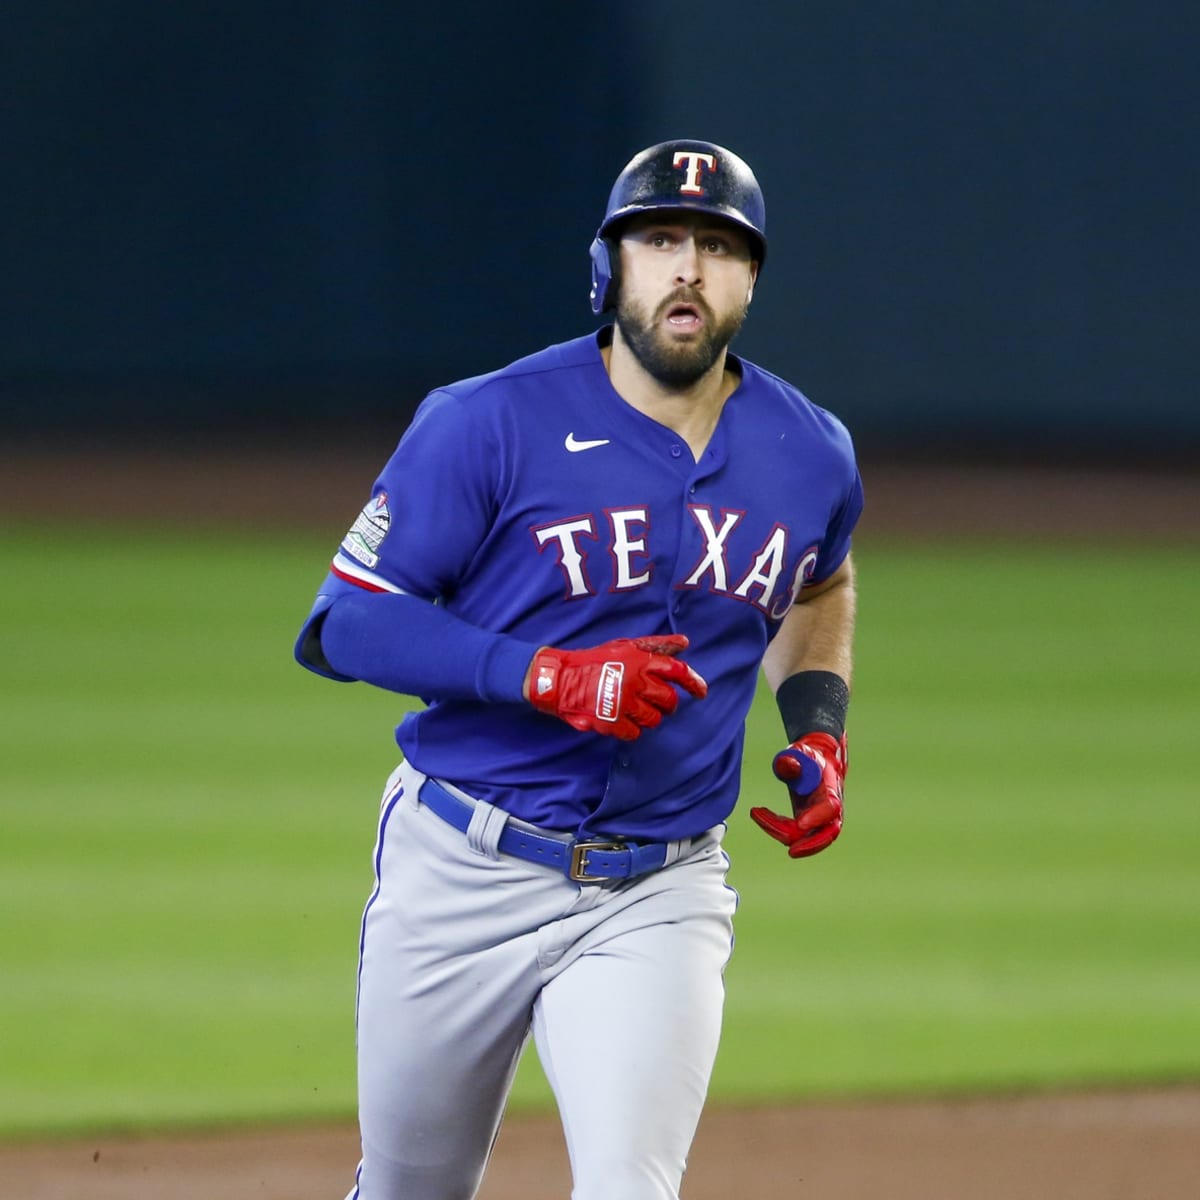 Yankees OF Joey Gallo could be moved down in lineup amid struggles